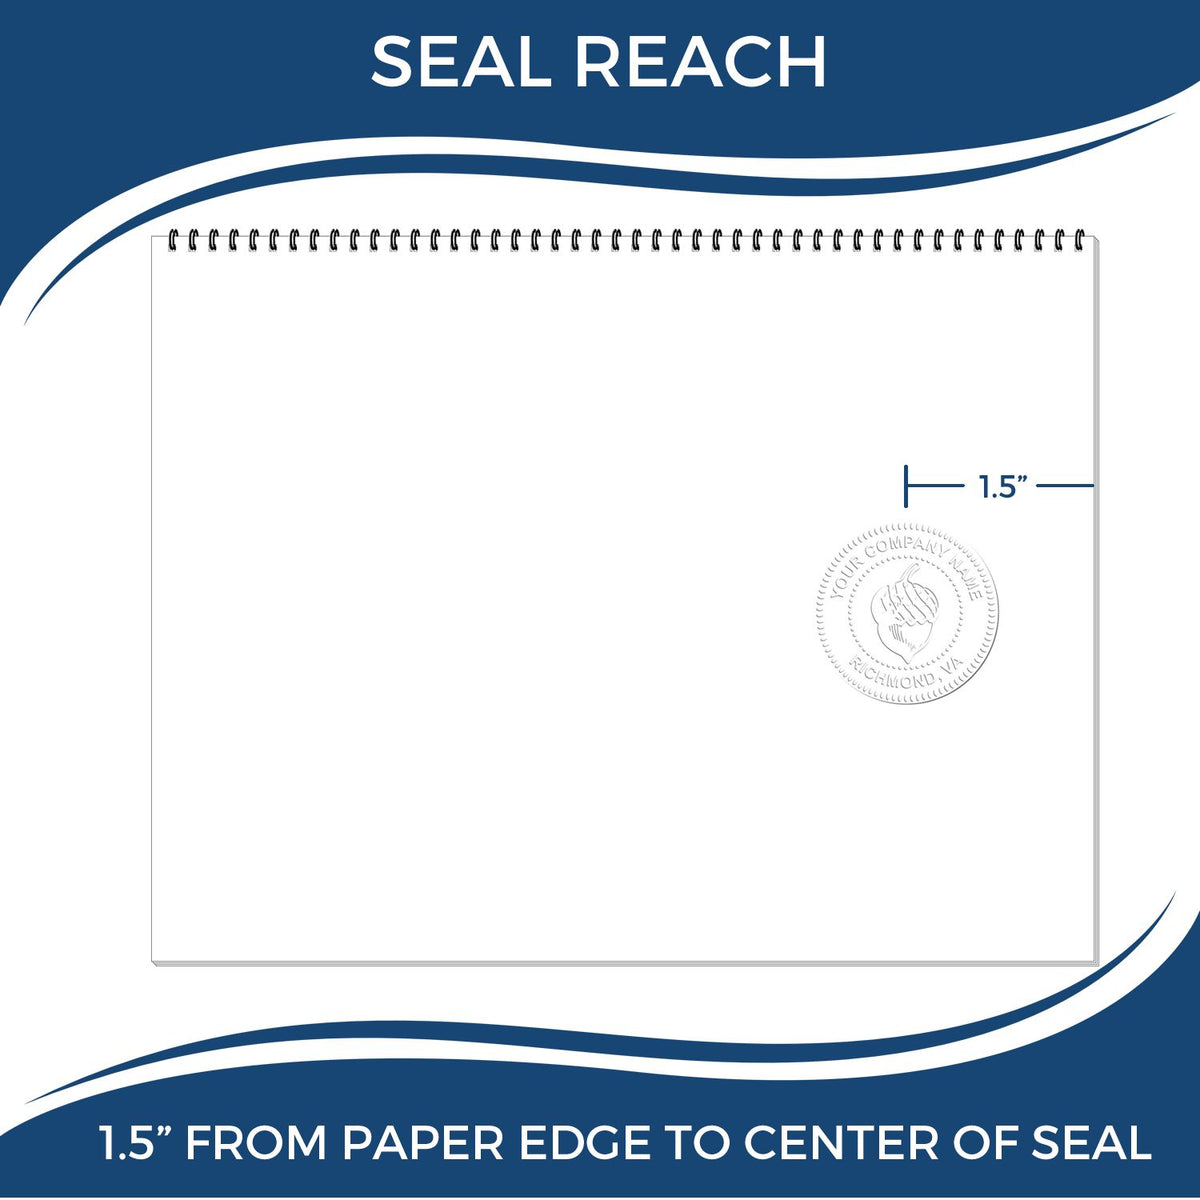 An infographic showing the seal reach which is represented by a ruler and a miniature seal image of the Soft Missouri Professional Geologist Seal